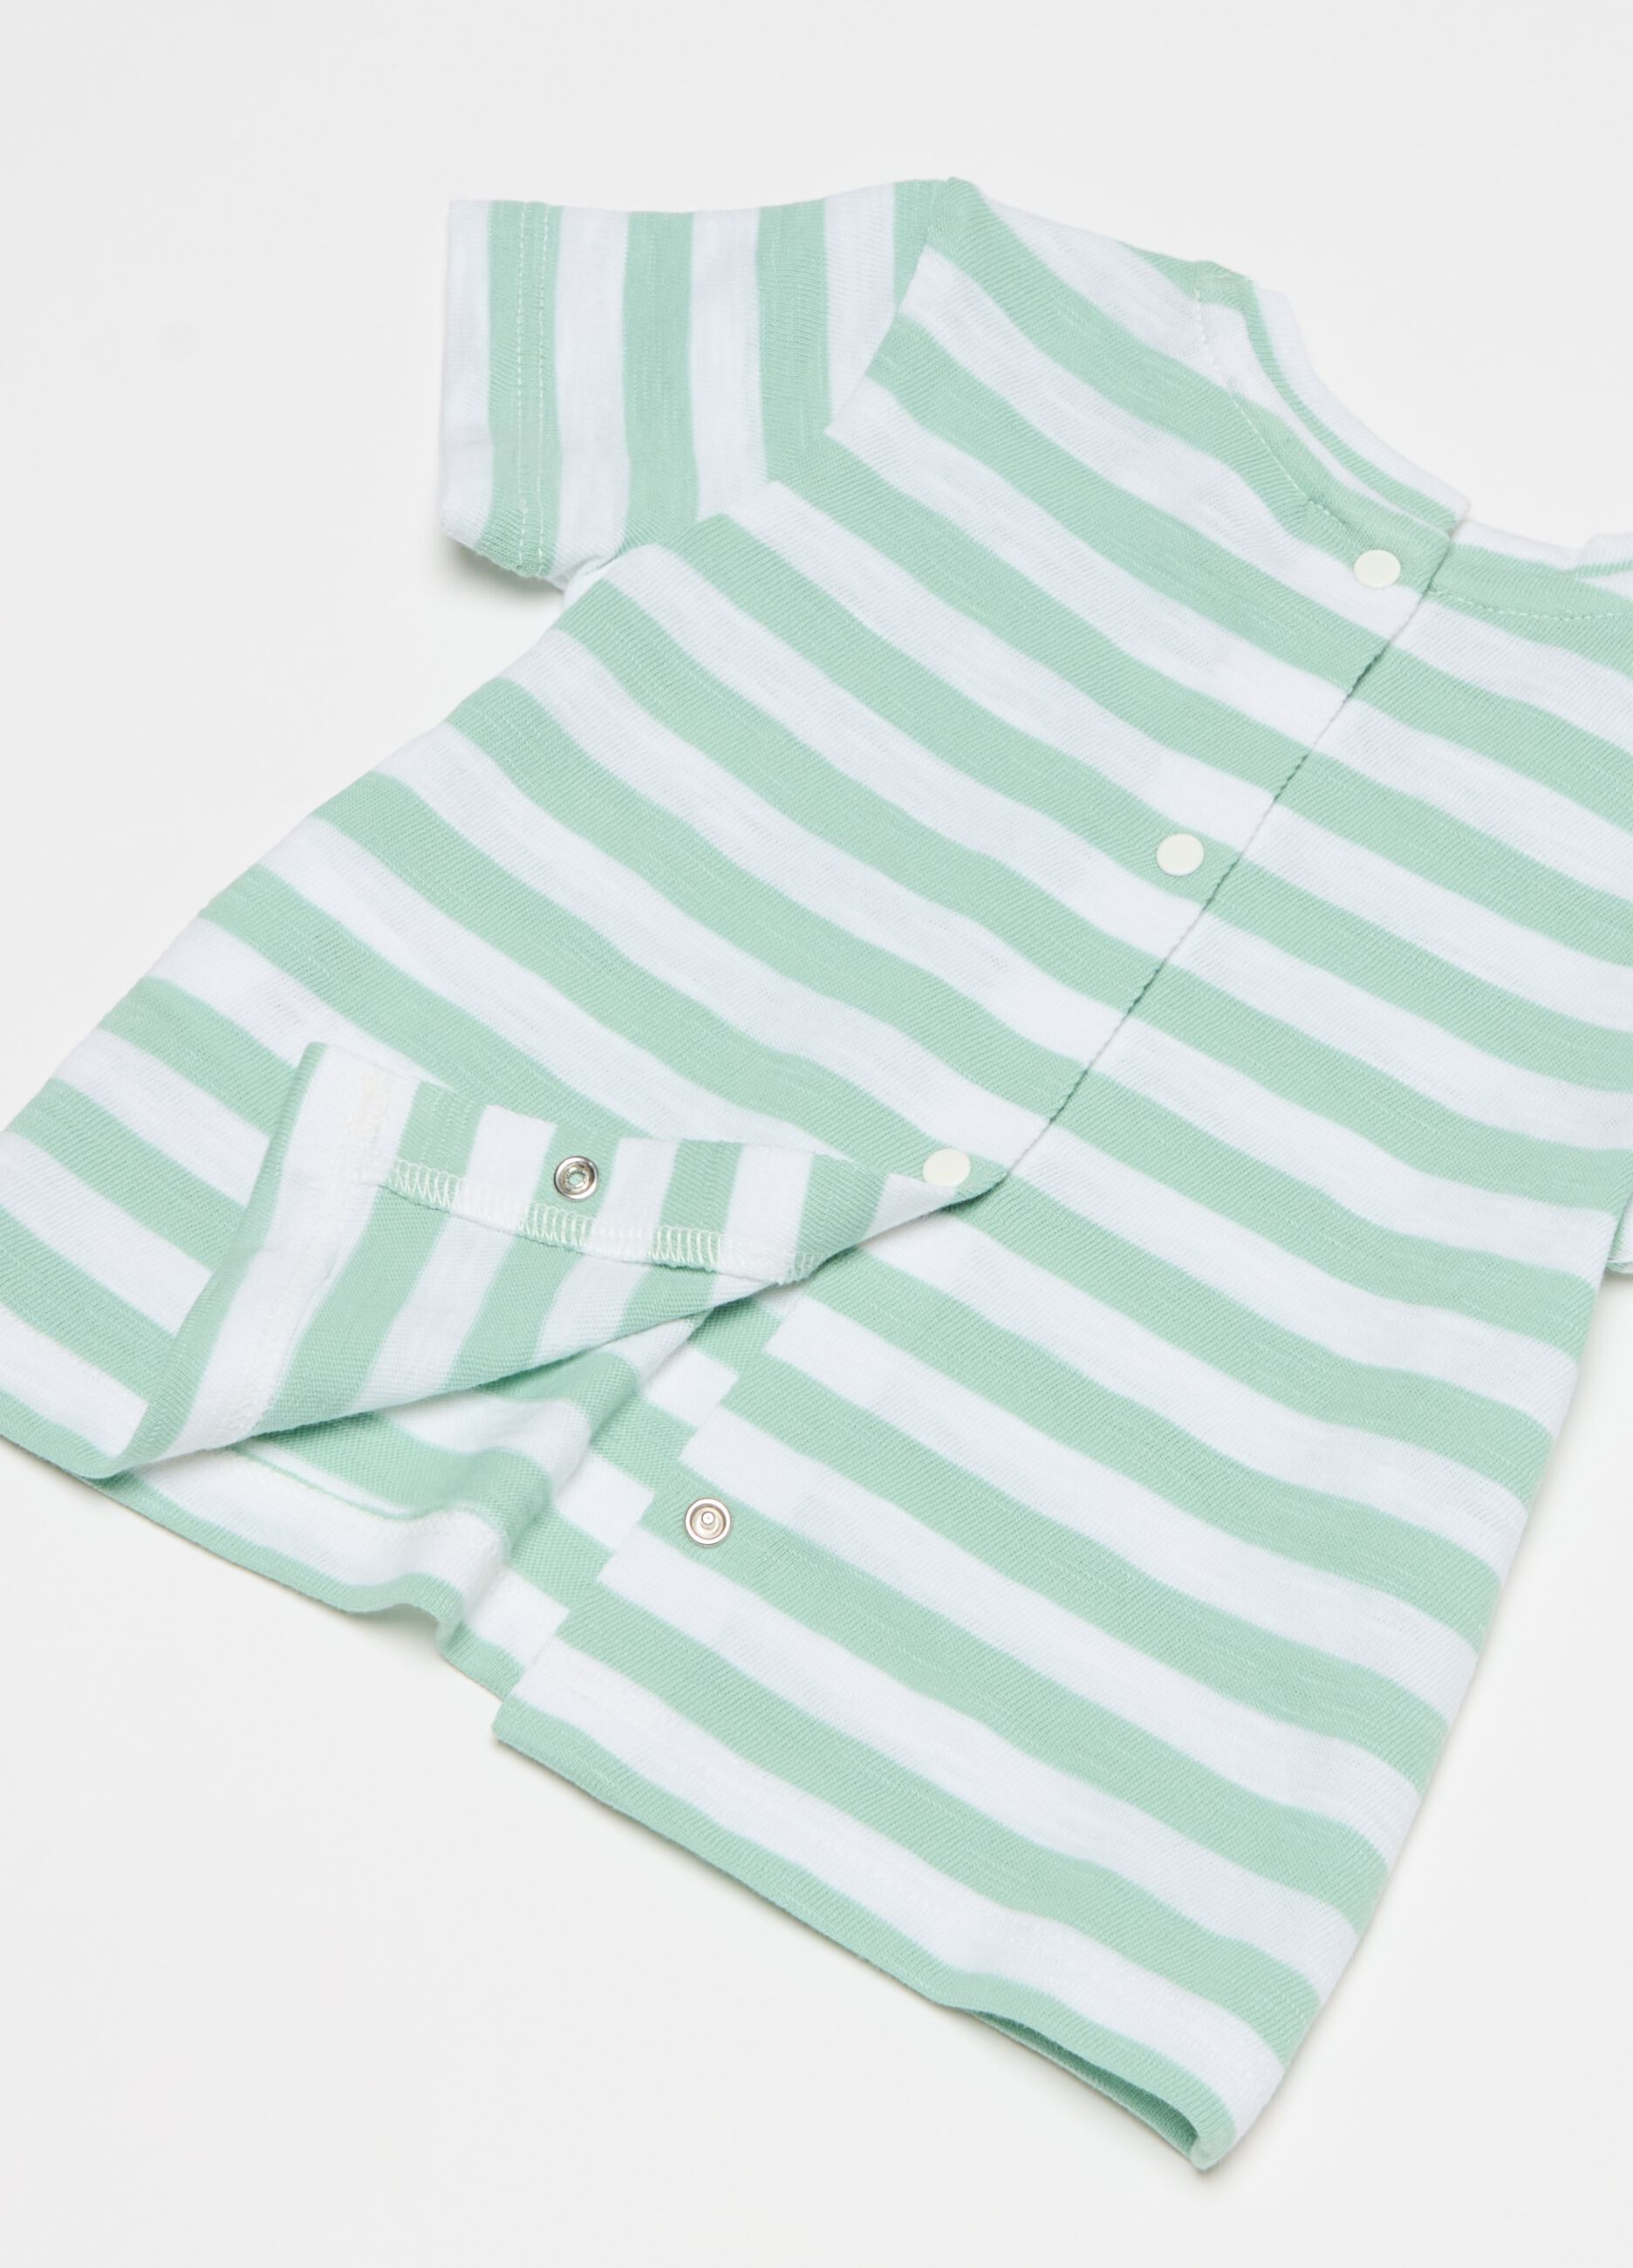 Jogging set in organic cotton with striped pattern